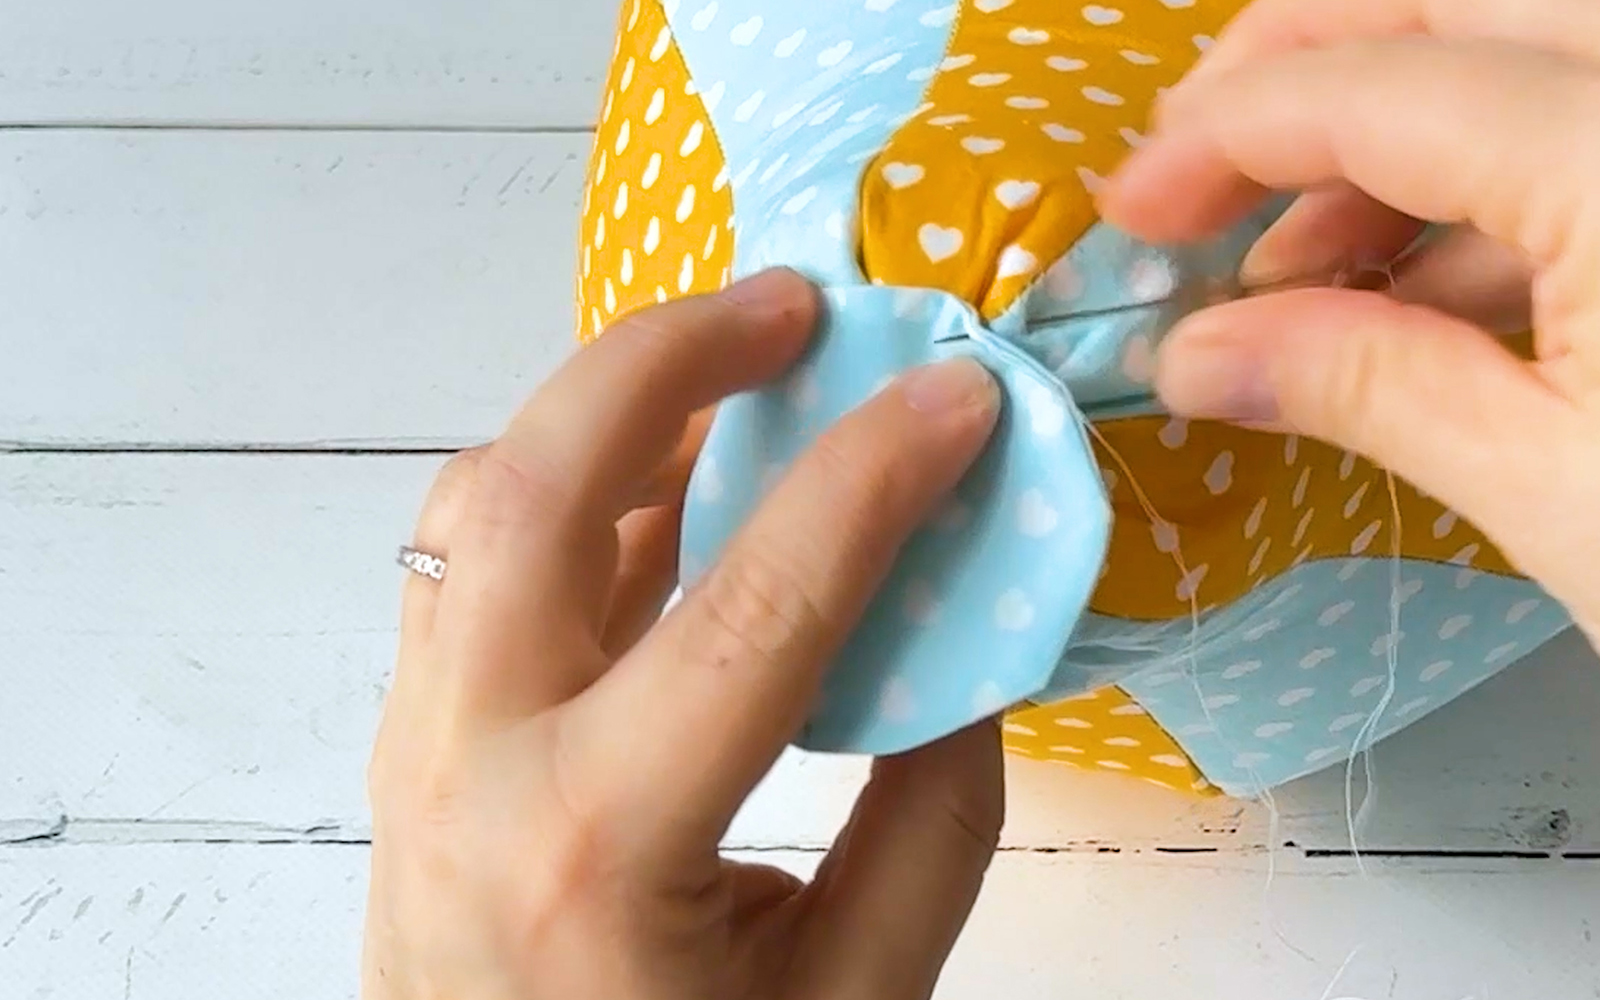 Fabric circle being sewn to bottom of fabric balloon with needle and thread.